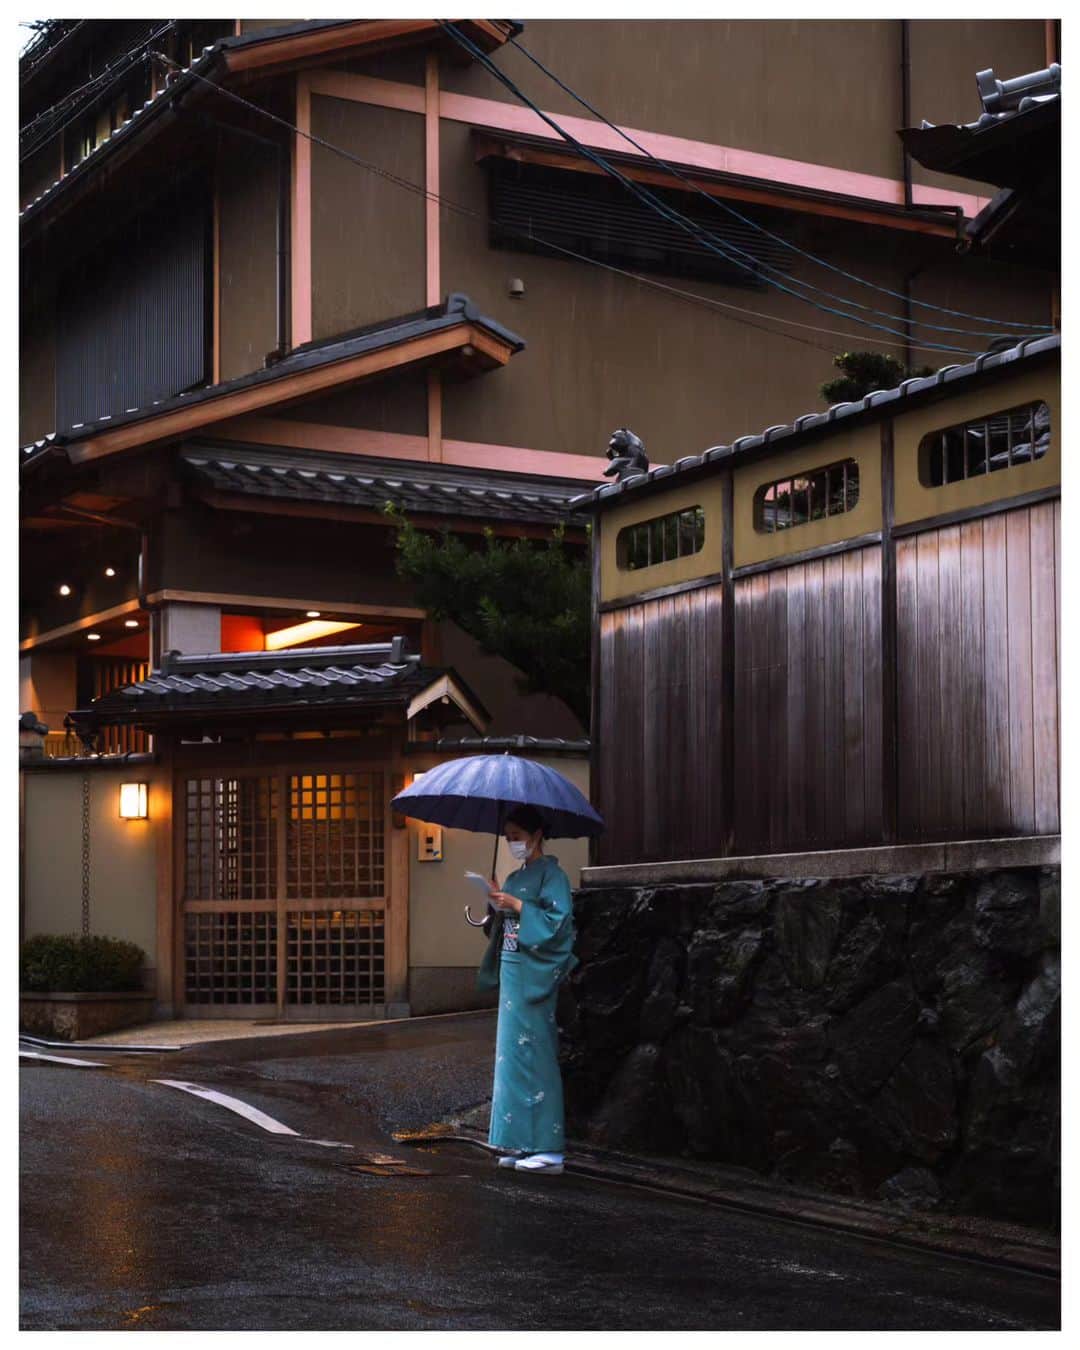 Takashi Yasuiのインスタグラム：「Kyoto ☔ November 2021  📕My photo book - worldwide shipping daily - 🖥 Lightroom presets ▶▶Link in bio  #USETSU #USETSUpresets #TakashiYasui #SPiCollective #filmic_streets #ASPfeatures #photocinematica #STREETGRAMMERS #street_storytelling #bcncollective #ifyouleave #sublimestreet #streetfinder #timeless_streets #MadeWithLightroom #worldviewmag #hellofrom #reco_ig」